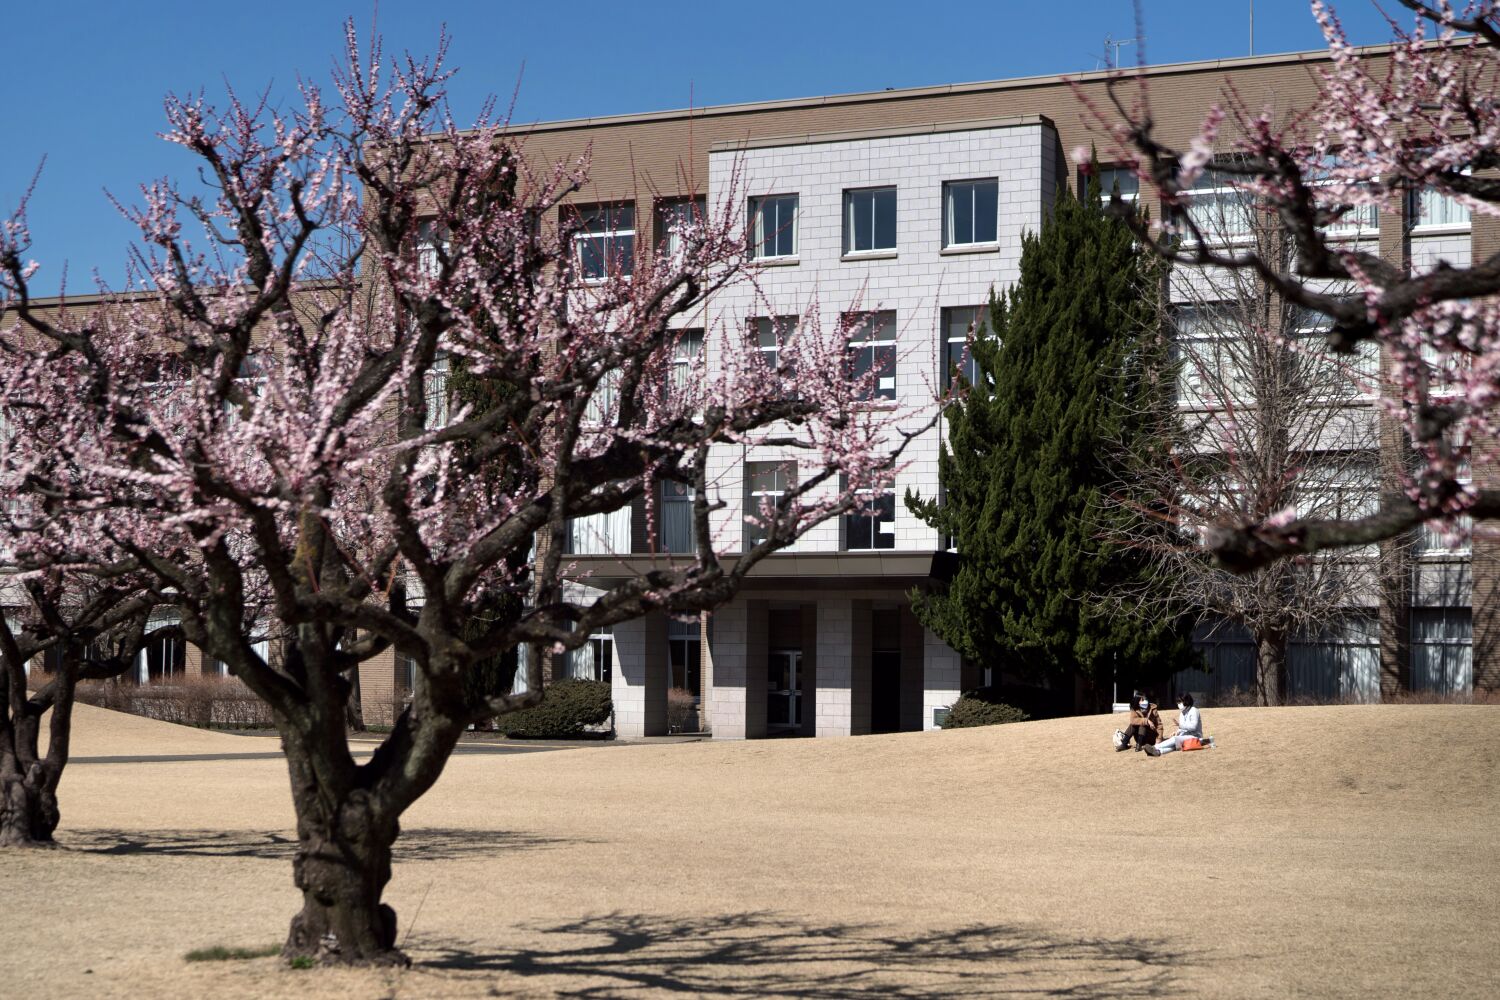 Japan's plummeting university enrollment forecasts what could be ahead for the U.S.